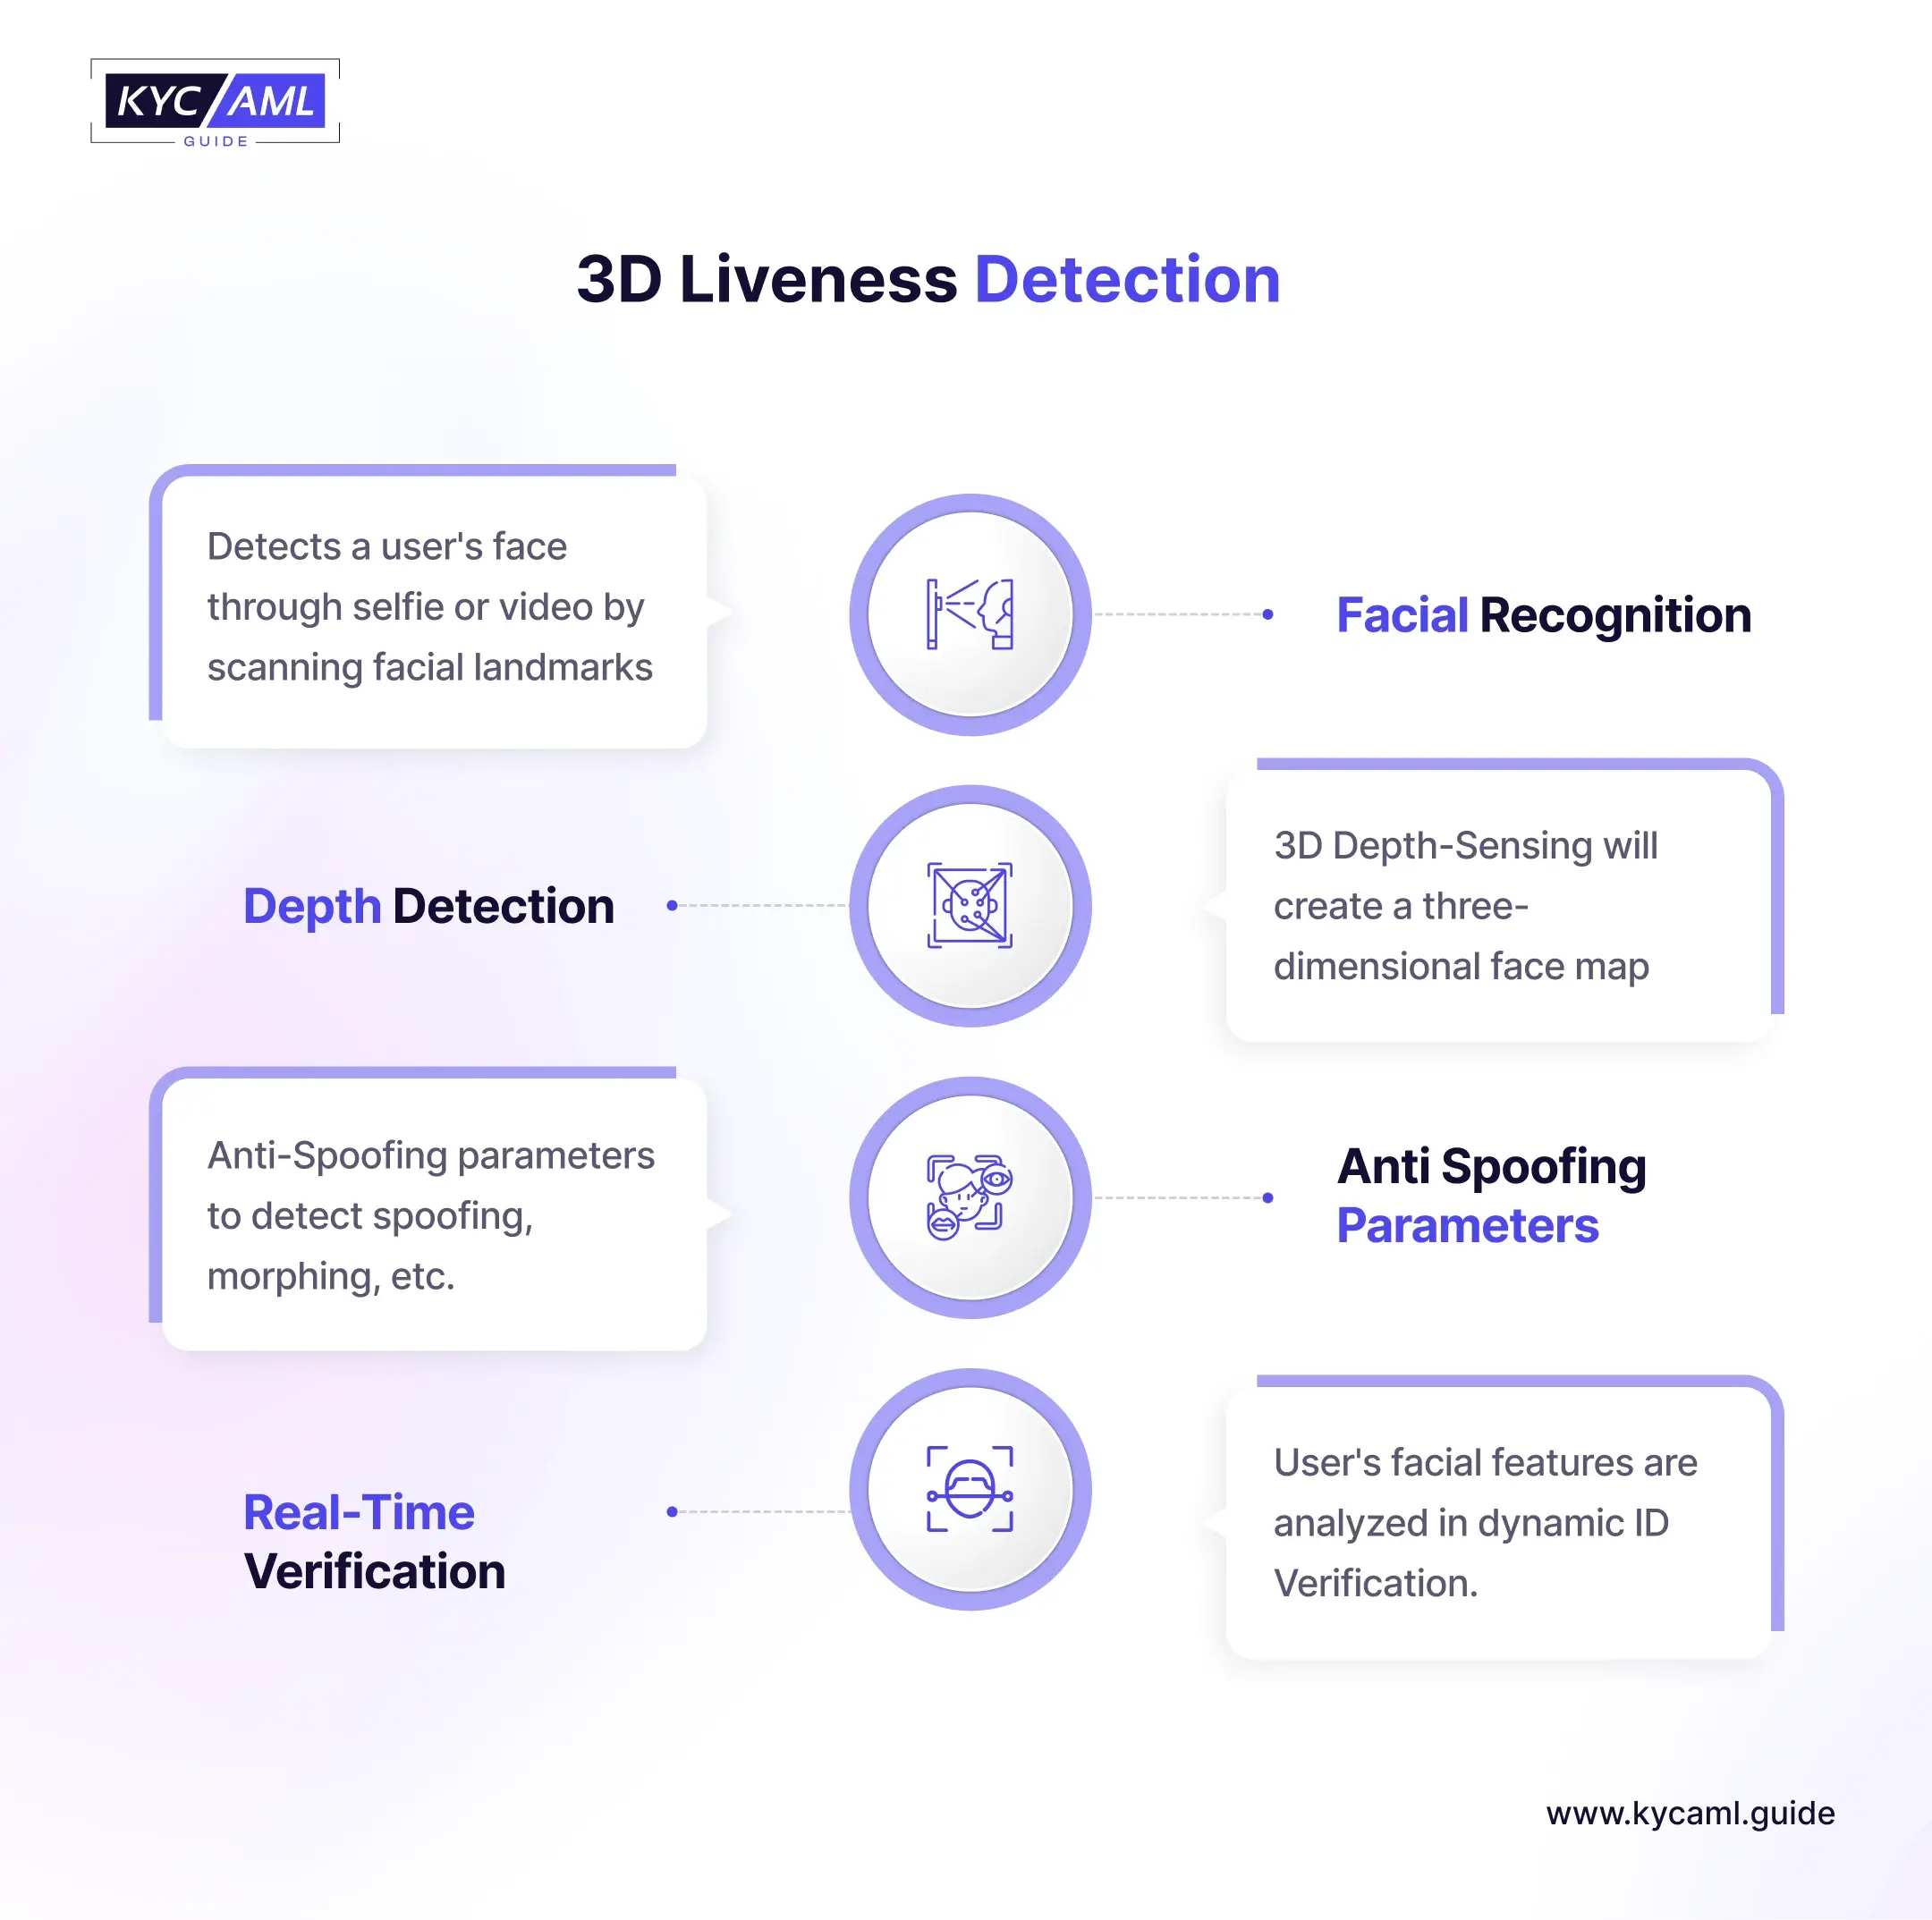 The infographic shows elements of 3D liveness detection including 1) Facial Recognition, 2) Depth Detection, 3) Anti-Spoofing Parameters, 4) Real-Time Verification